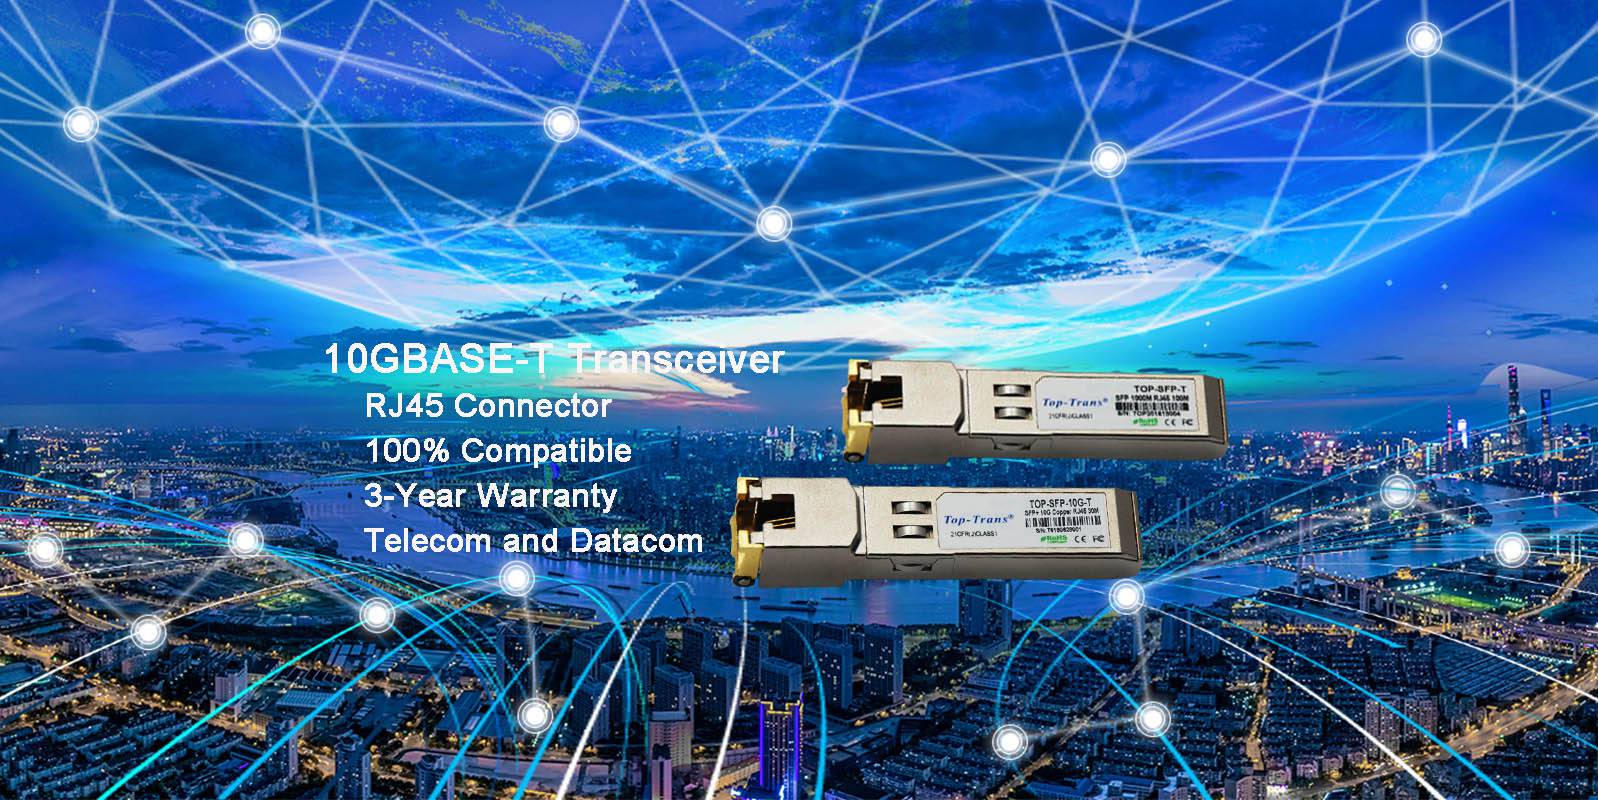 10GBASE-T Transceiver